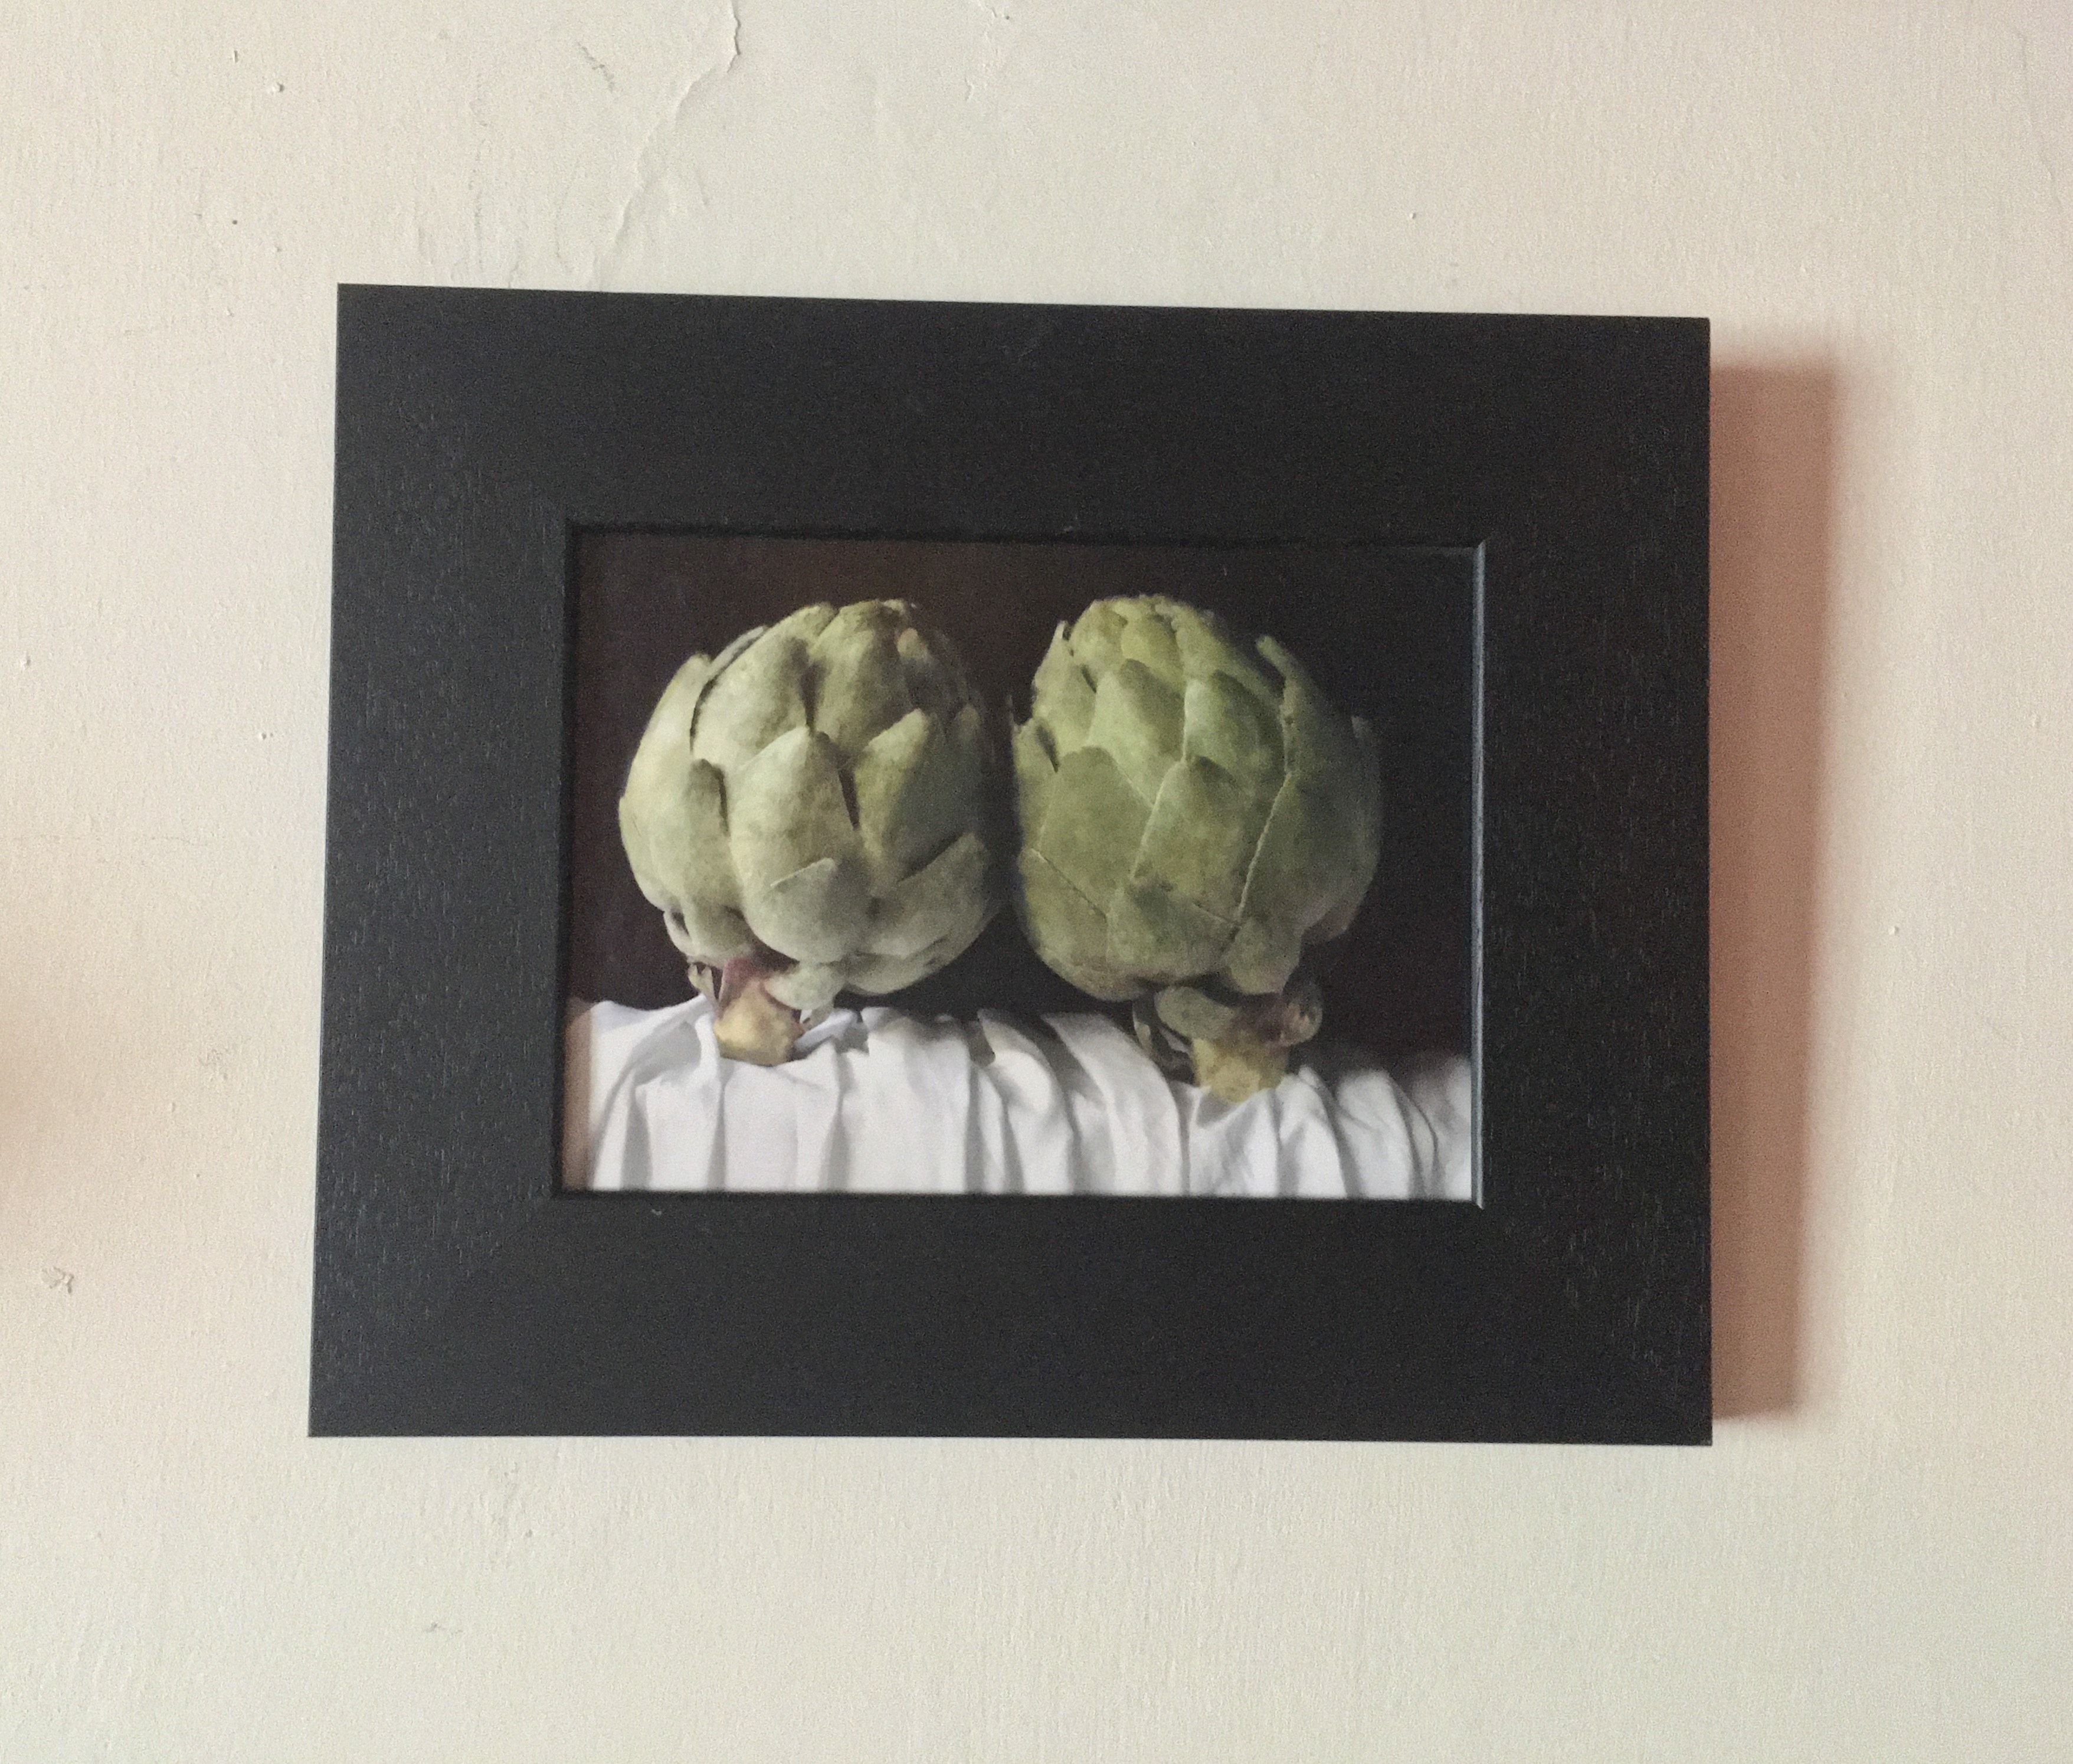 Artichokes by Kate Verrion - Secondary Image